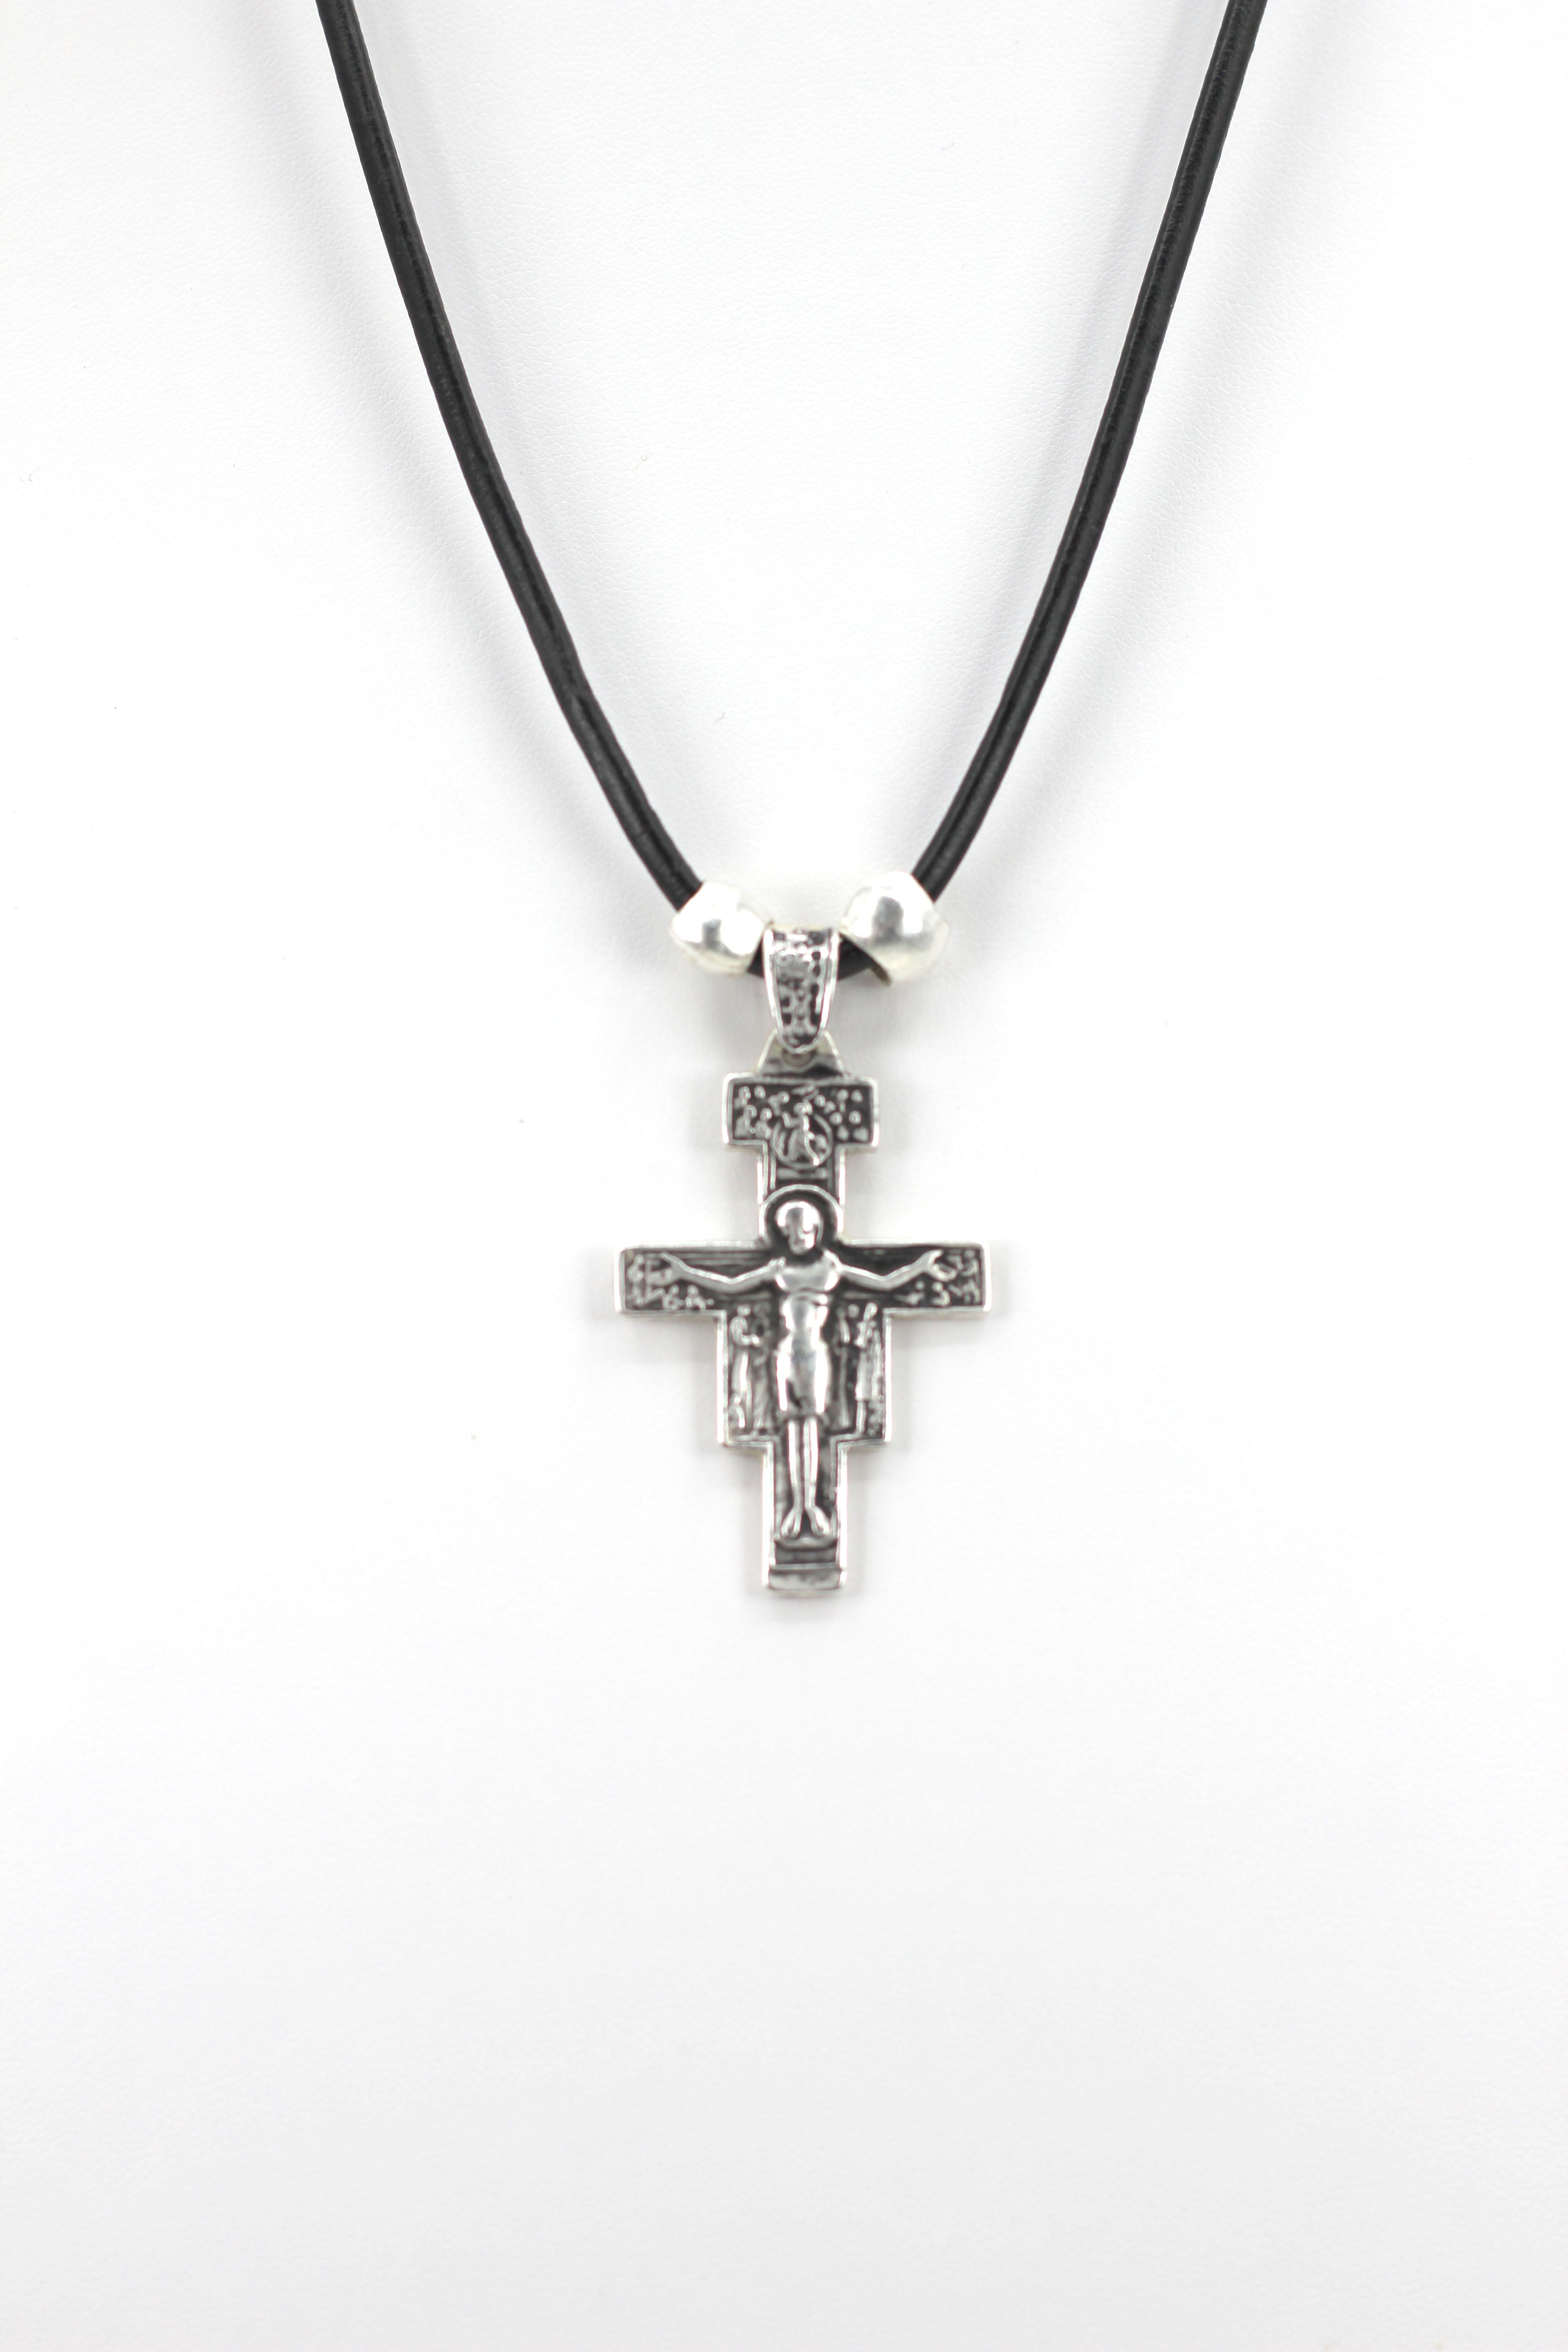 Vintage The San Damiano / San Francisco Cross Necklace Handmade Jewelry with Genuine Leather Strap by Graciela's Collection